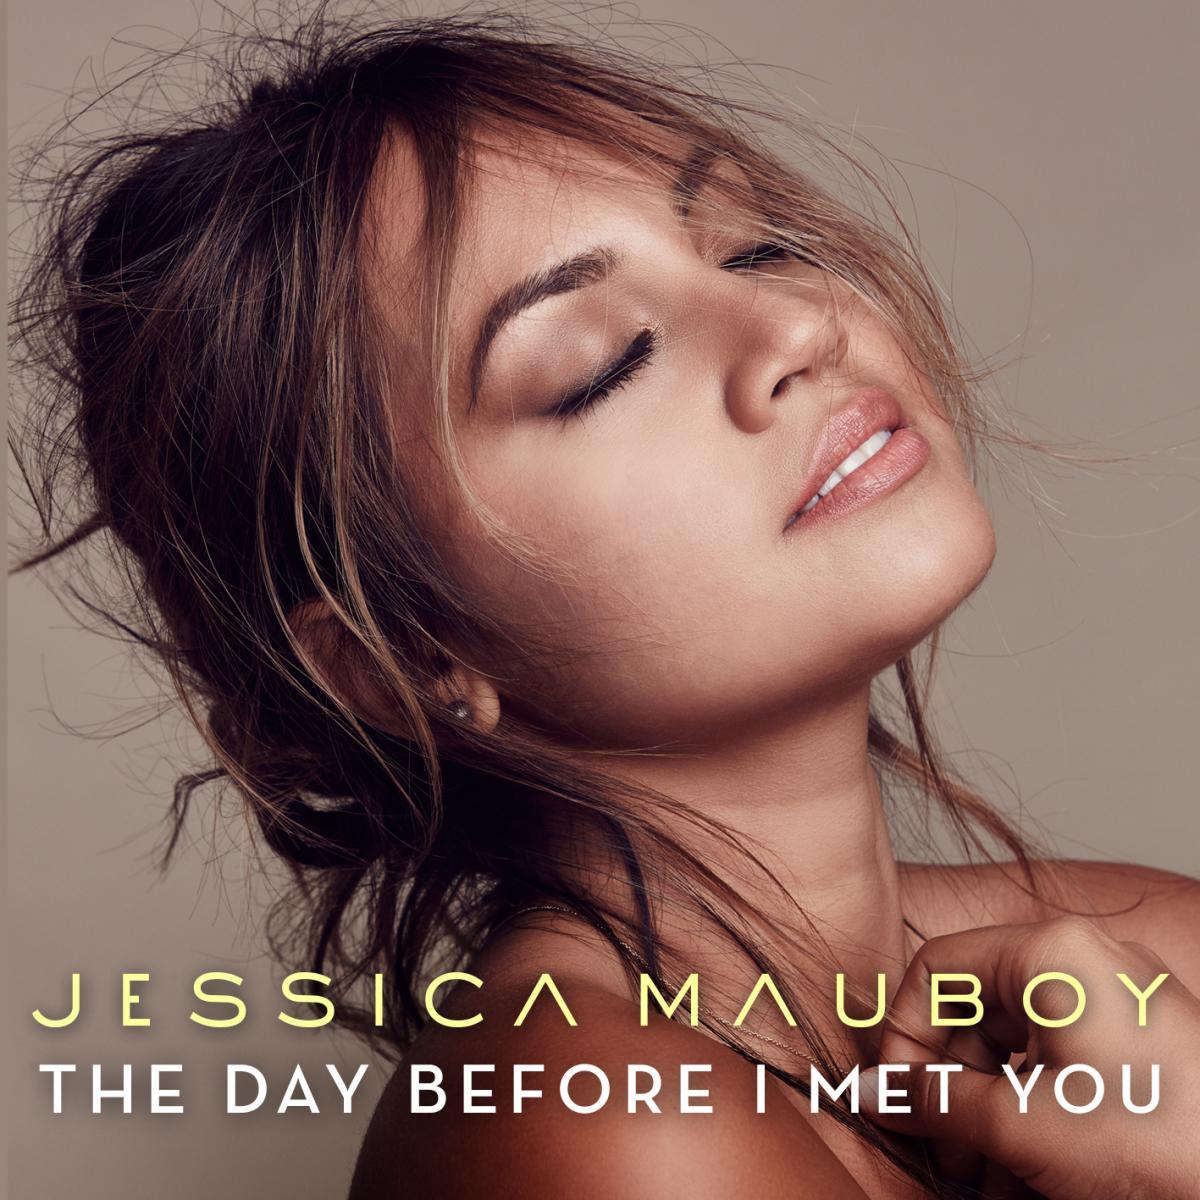 Jessica Mauboy: The Day Before I Met You (Music Video)